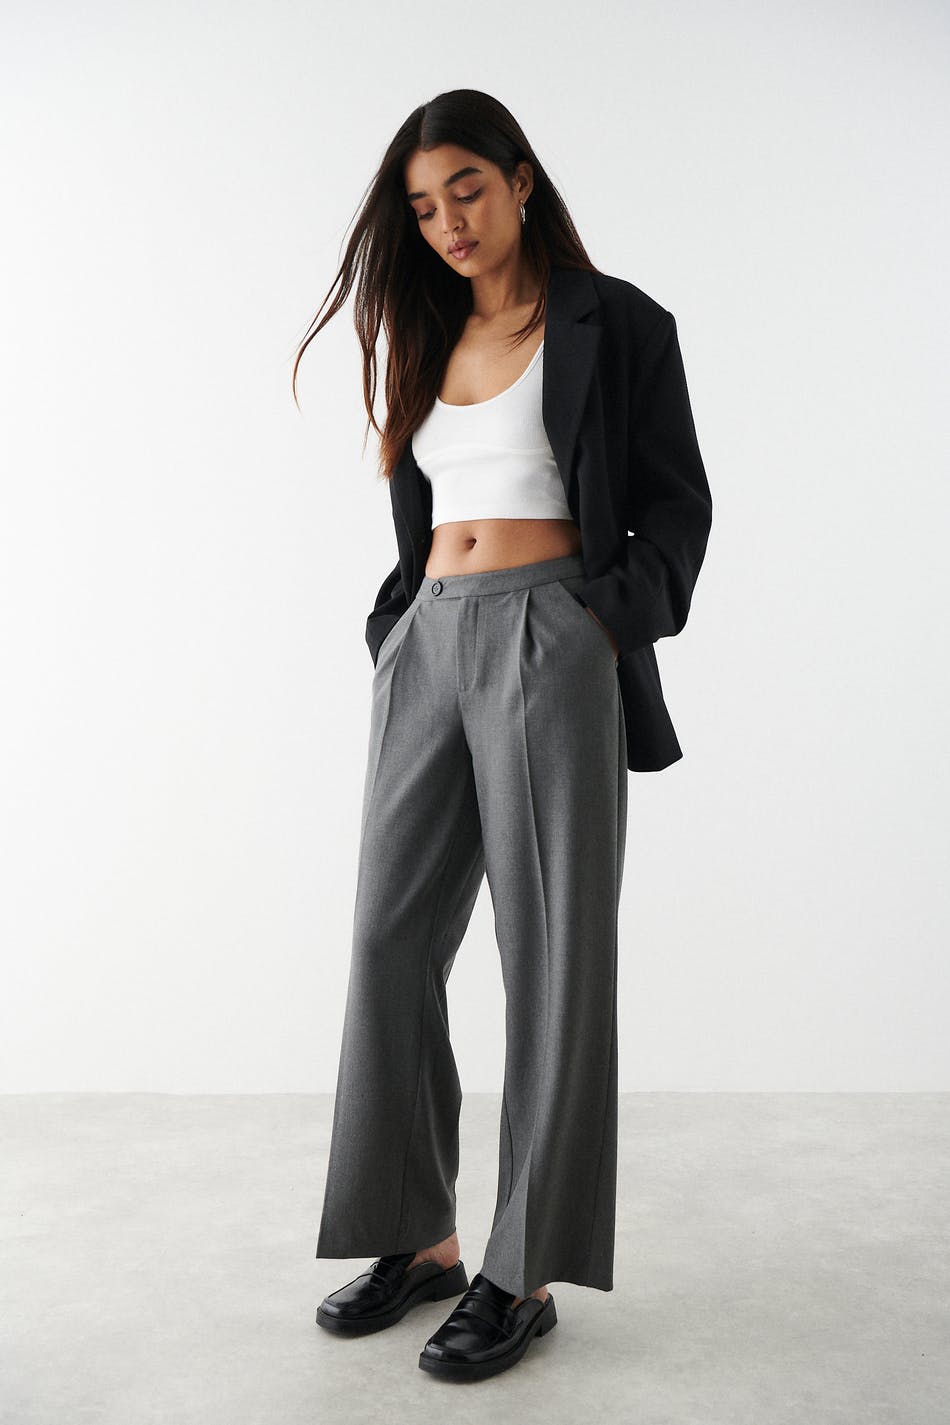 Buy Nelly Low Waist Straight Leg Pants - Black | Nelly.com